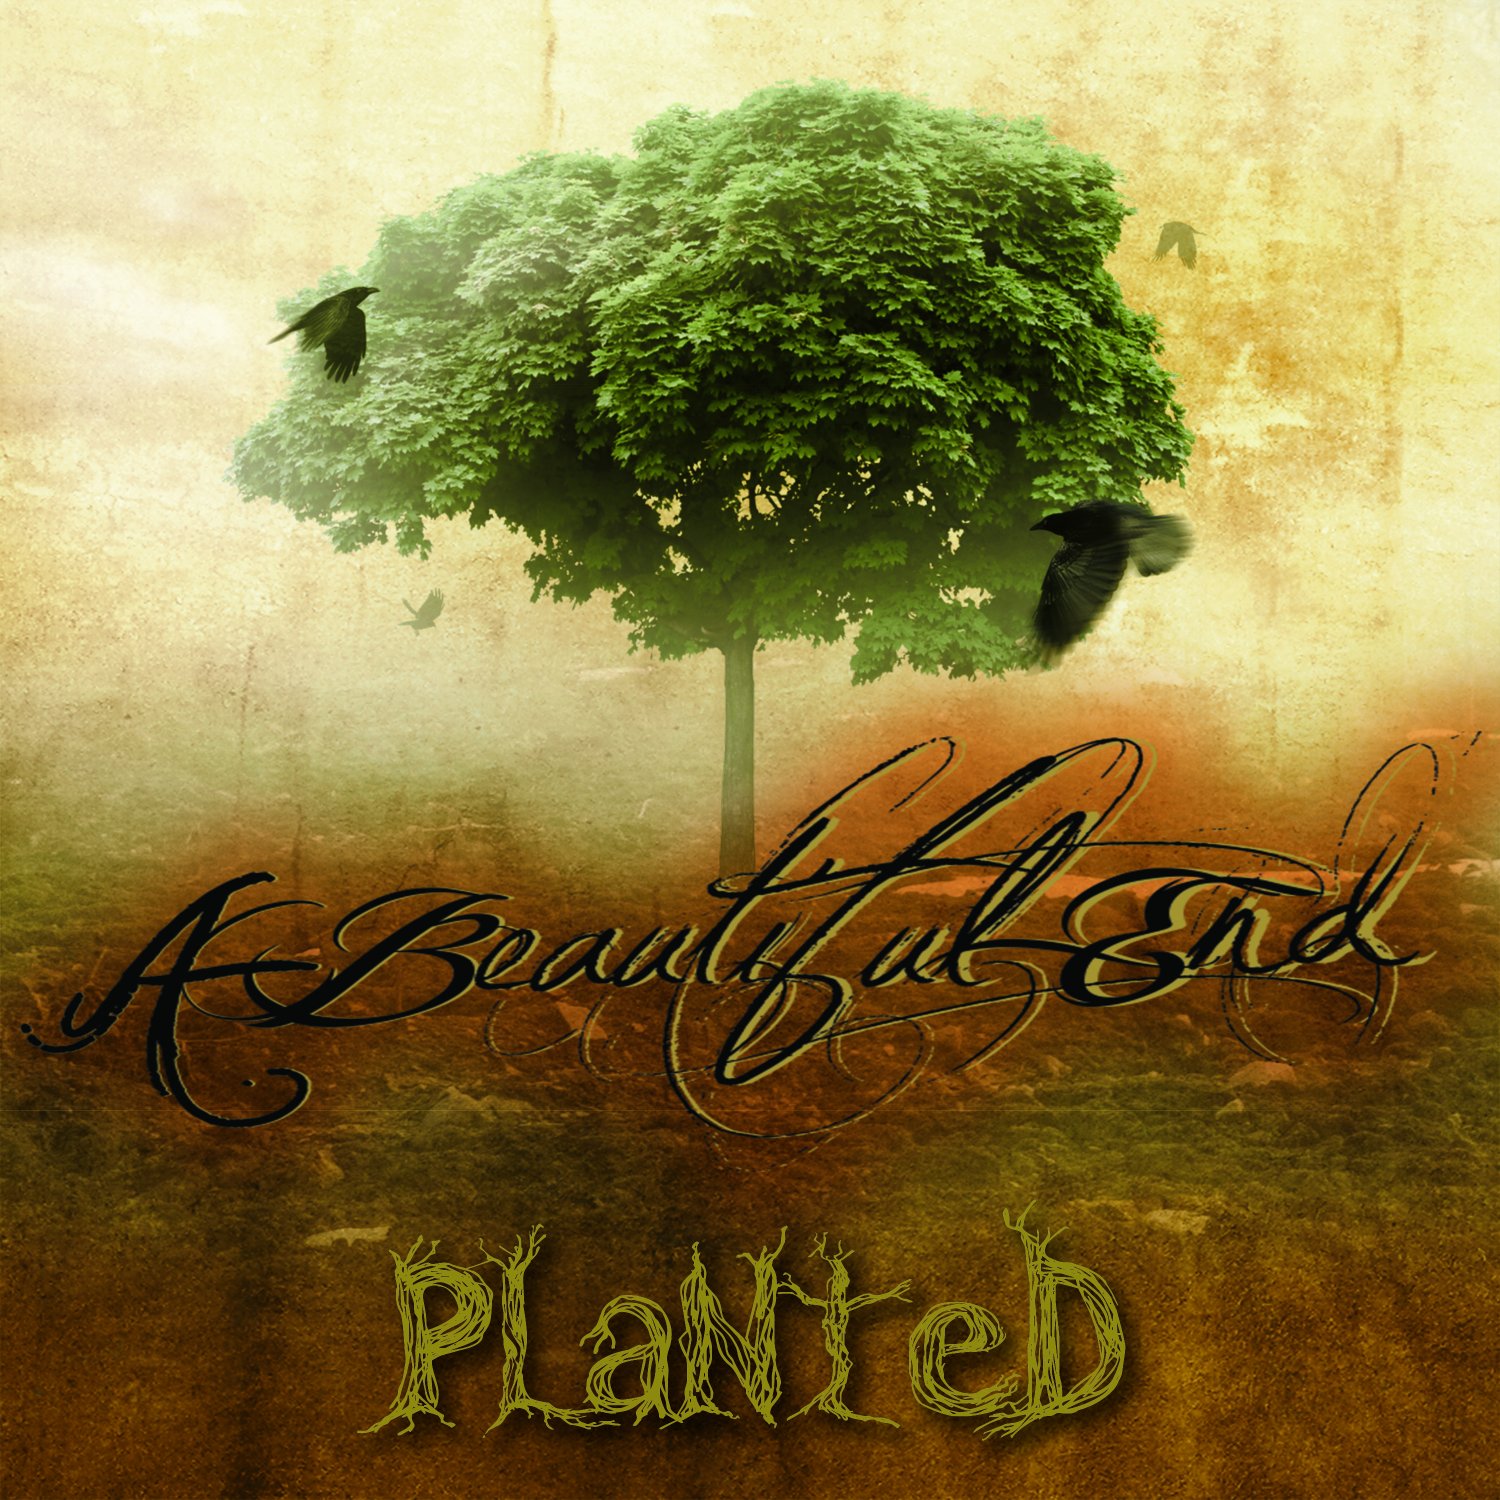 Planted by A Beautiful End USB Wristband